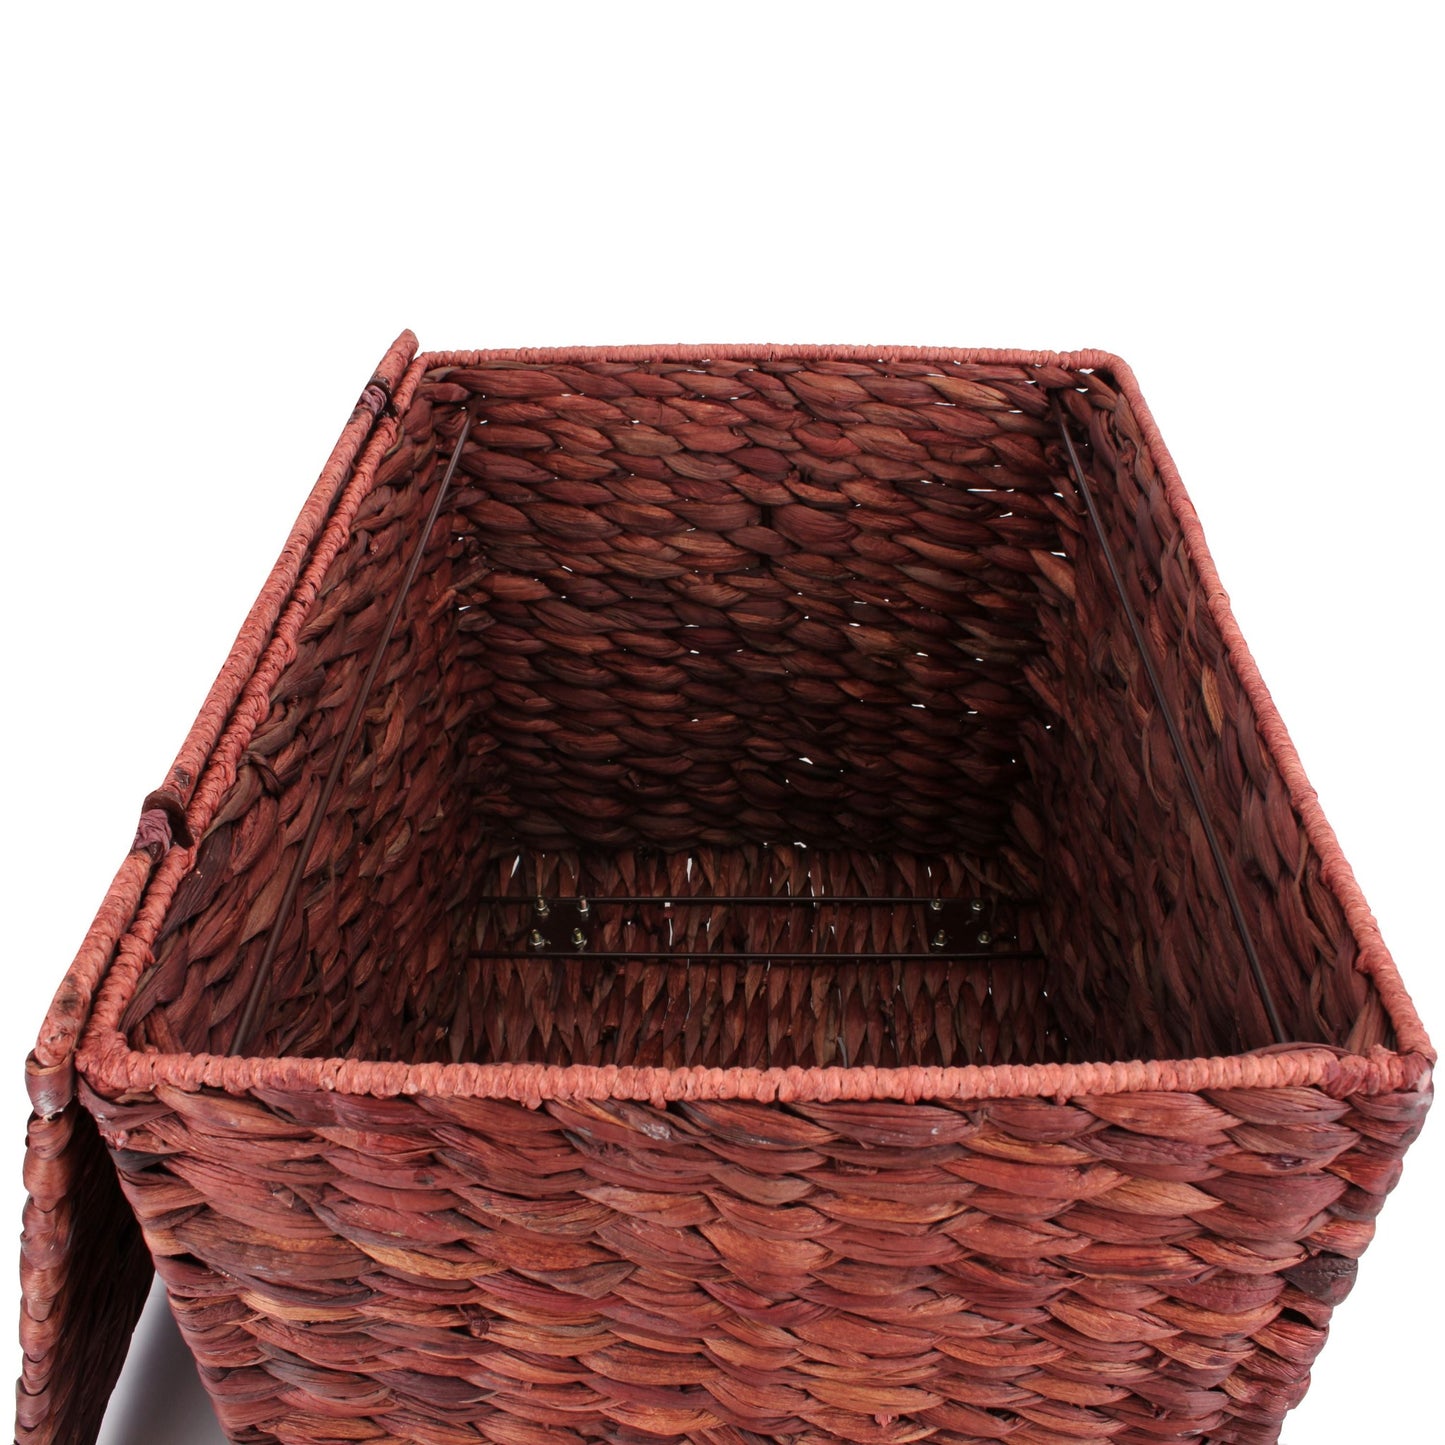 Seagrass Rolling File Cabinet - Russet Brown